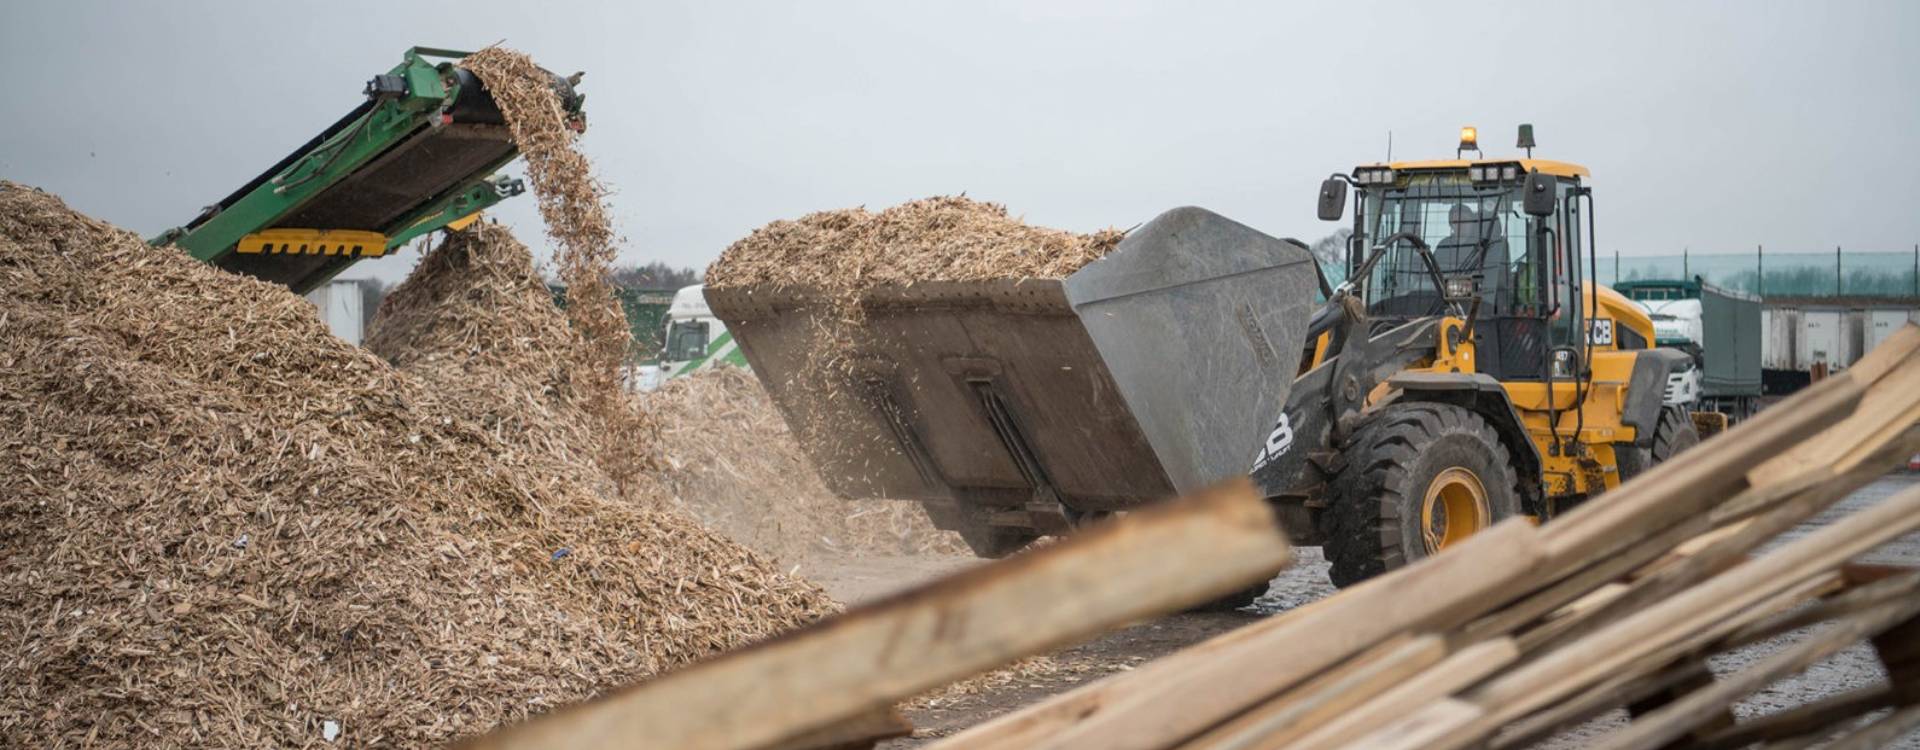 Processing waste wood